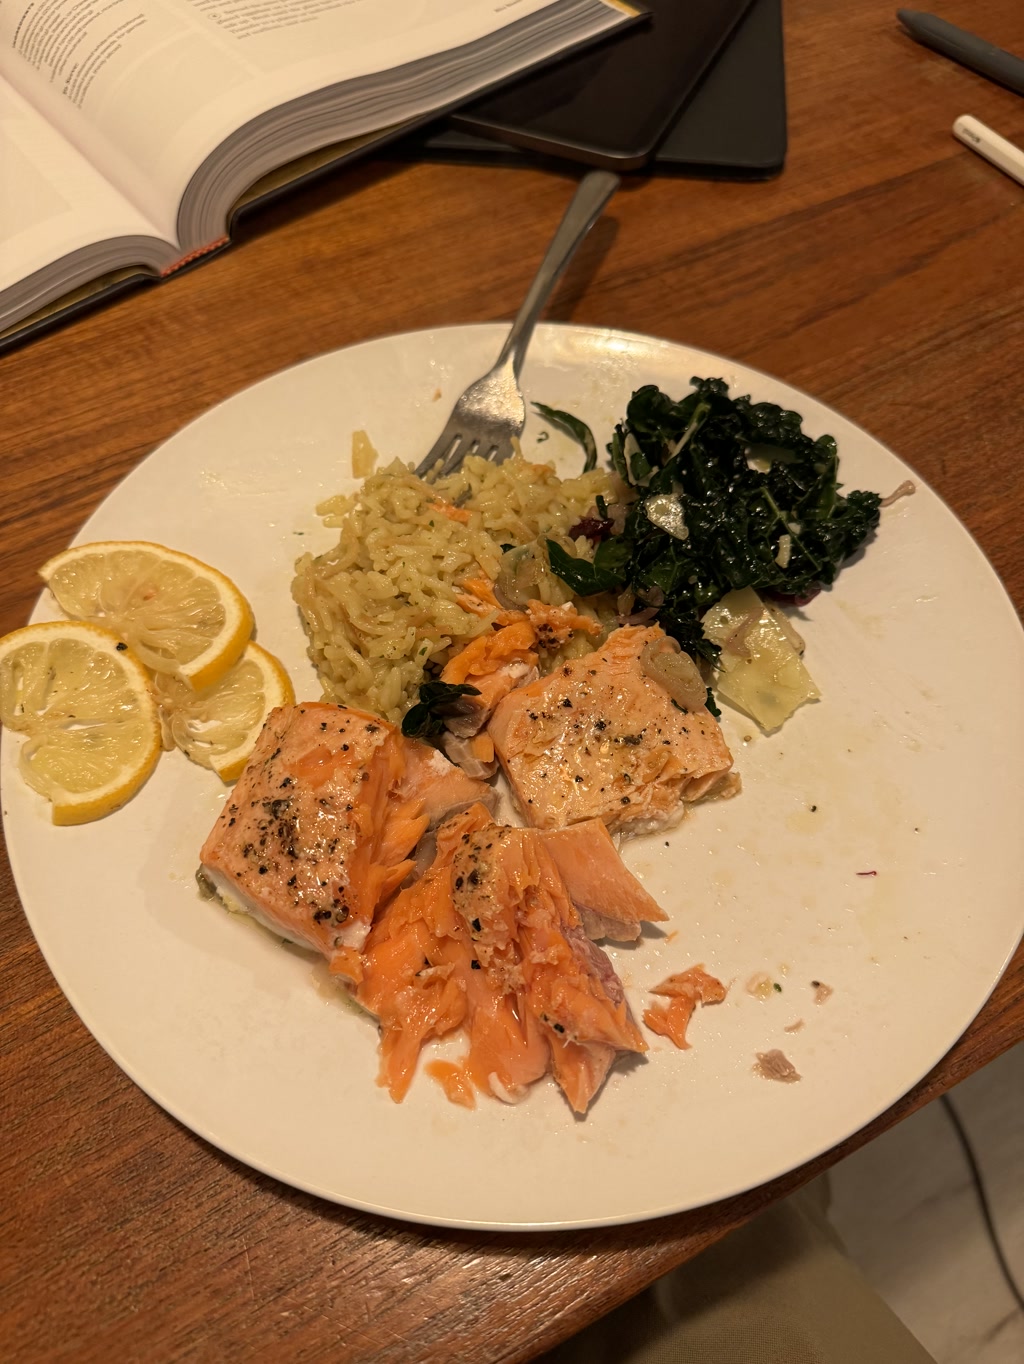 A plate of food is partially eaten. There are a few pieces of flaky cooked salmon seasoned with pepper, a side of rice pilaf, and a serving of dark leafy greens which could be spinach or kale. Two wedges of lemon are also on the plate, presumably for adding to the salmon or the greens. In the background, an open book, a closed notebook and a writing implement rest on a wooden table, suggesting a study or work environment where a meal is being enjoyed.